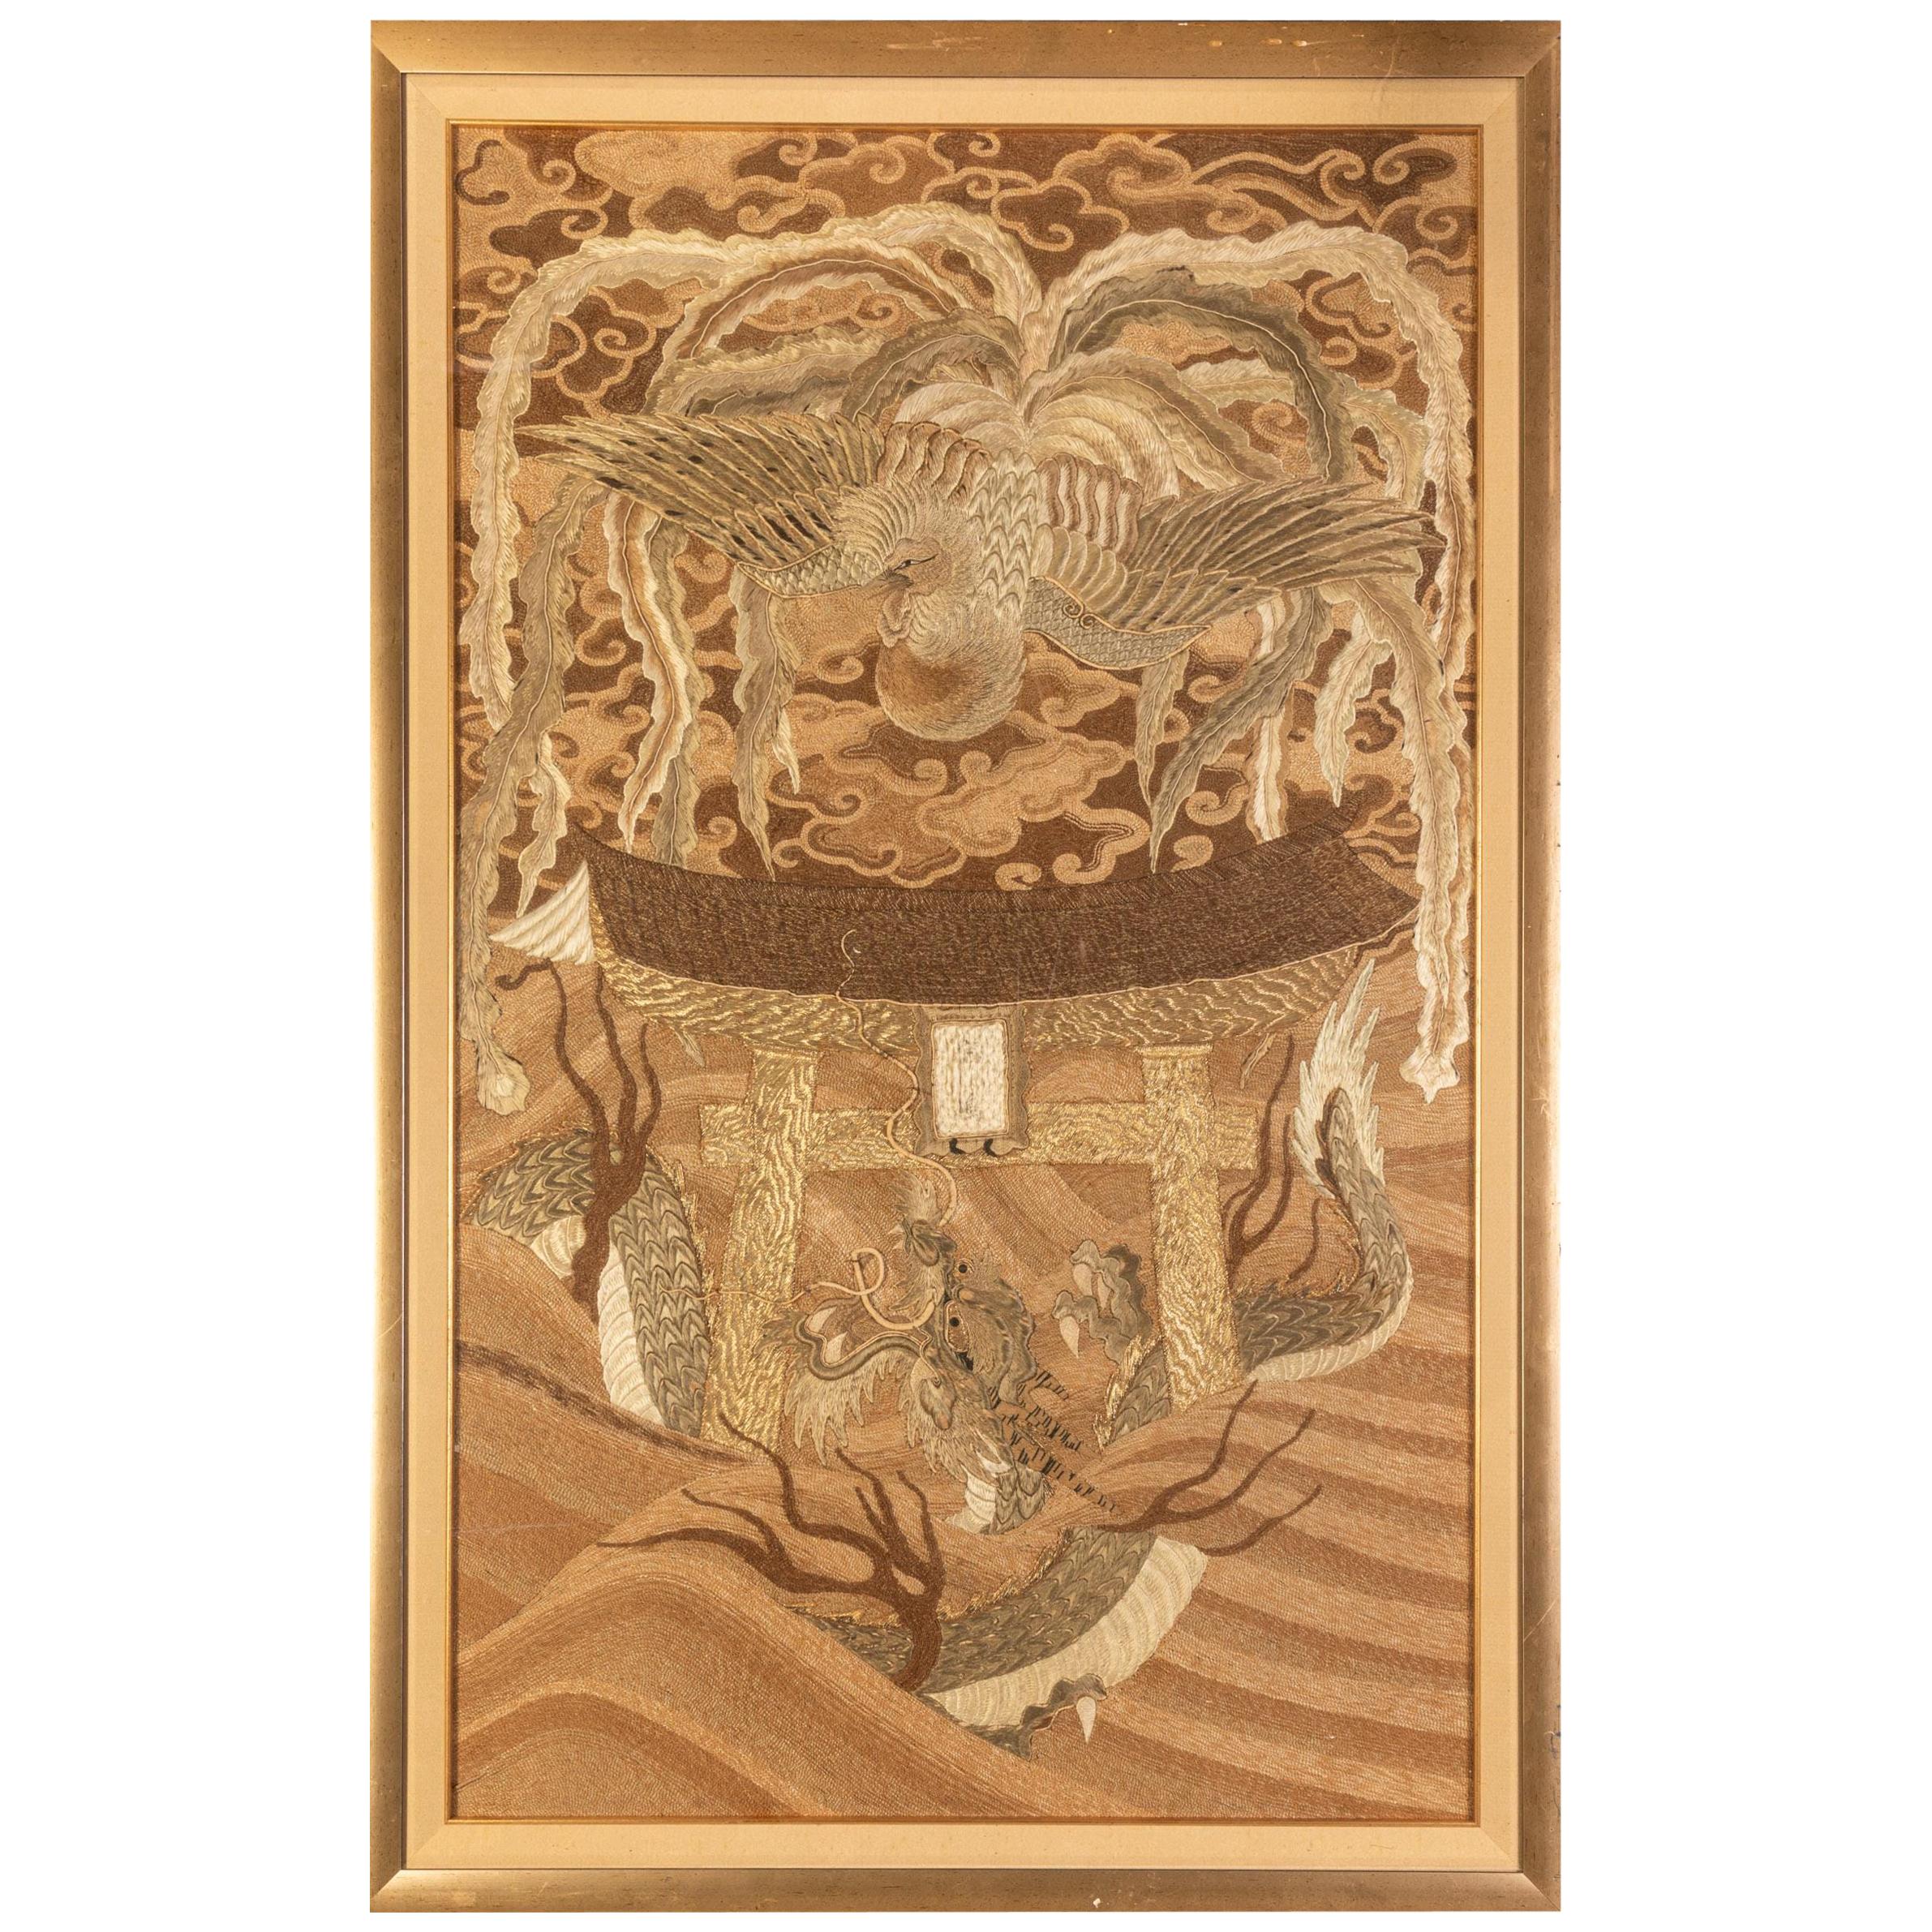 Framed Japanese Antique Phoenix Dragon Embroidery Tapestry Meiji Period